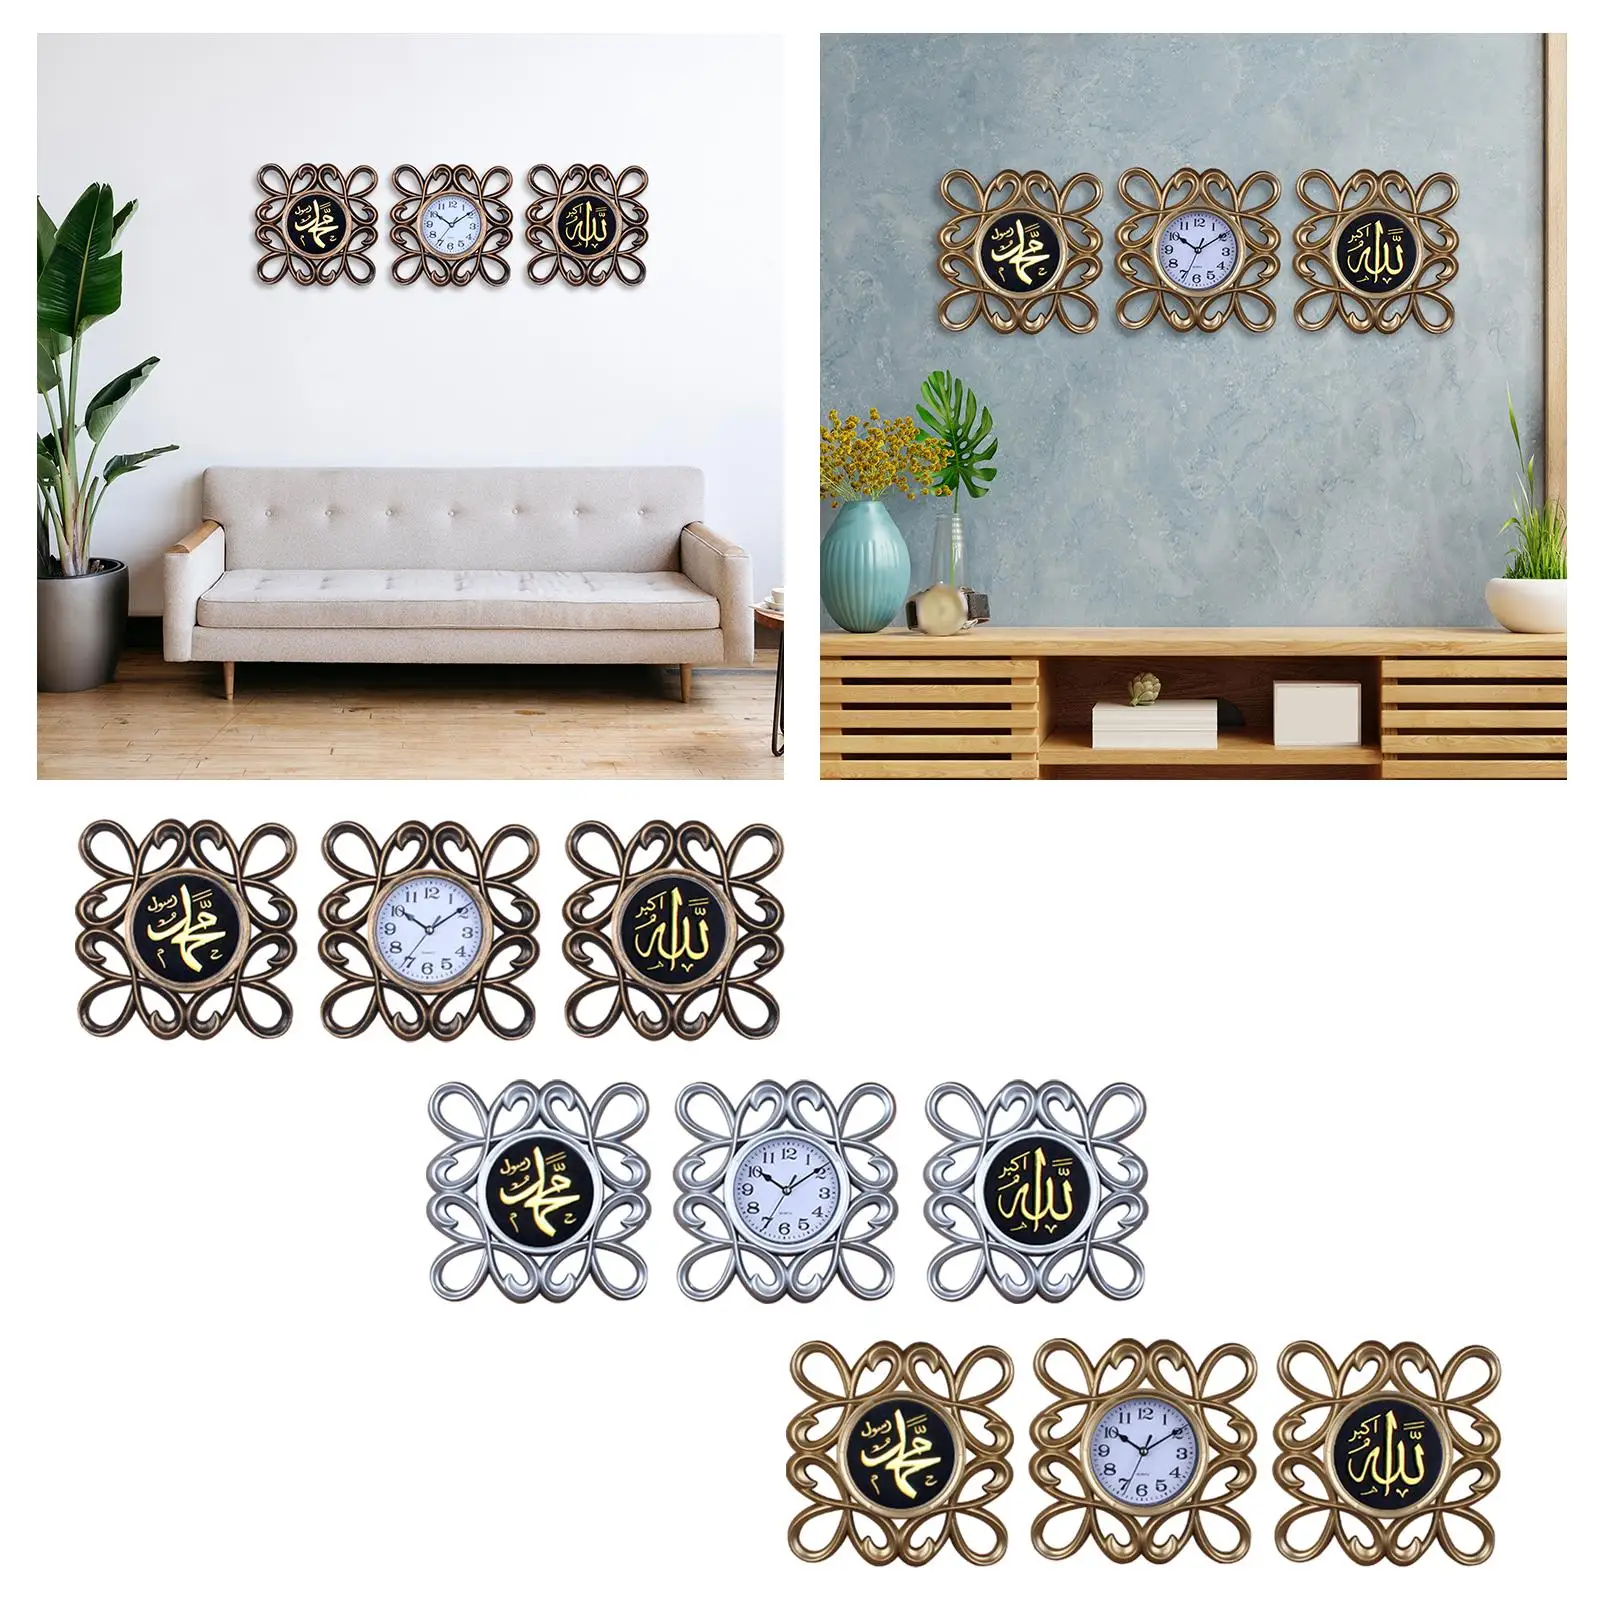 3 Pieces Islamic Decor Wall Hanging Clock Decorative Clock Plastic and Glass for Housewarming Gift Multifunctional Lightweight